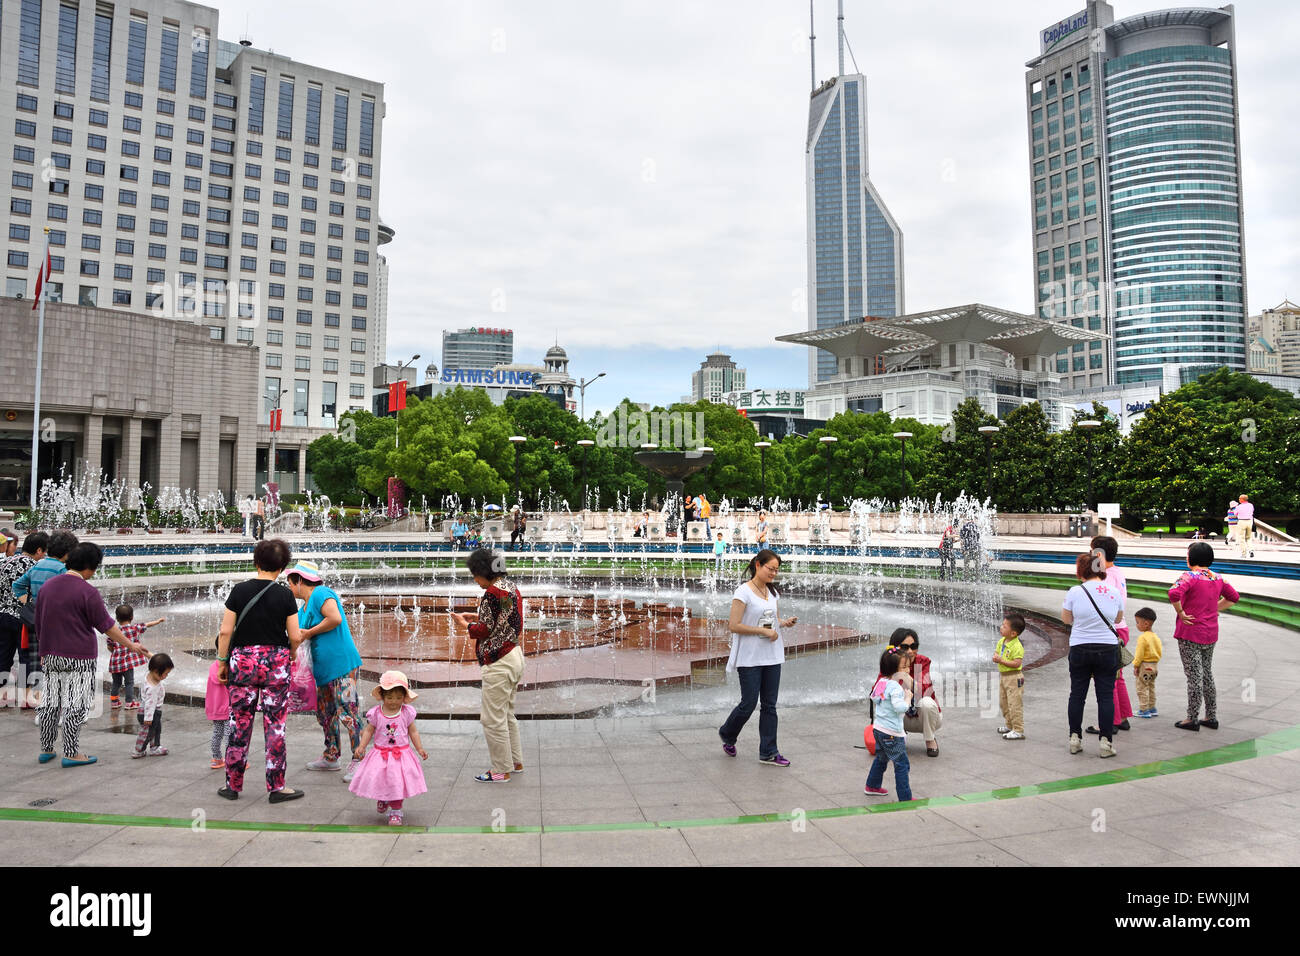 Fountain with people and children on People's Square Municipal Government Building Shanghai Municipality China skyline city Stock Photo